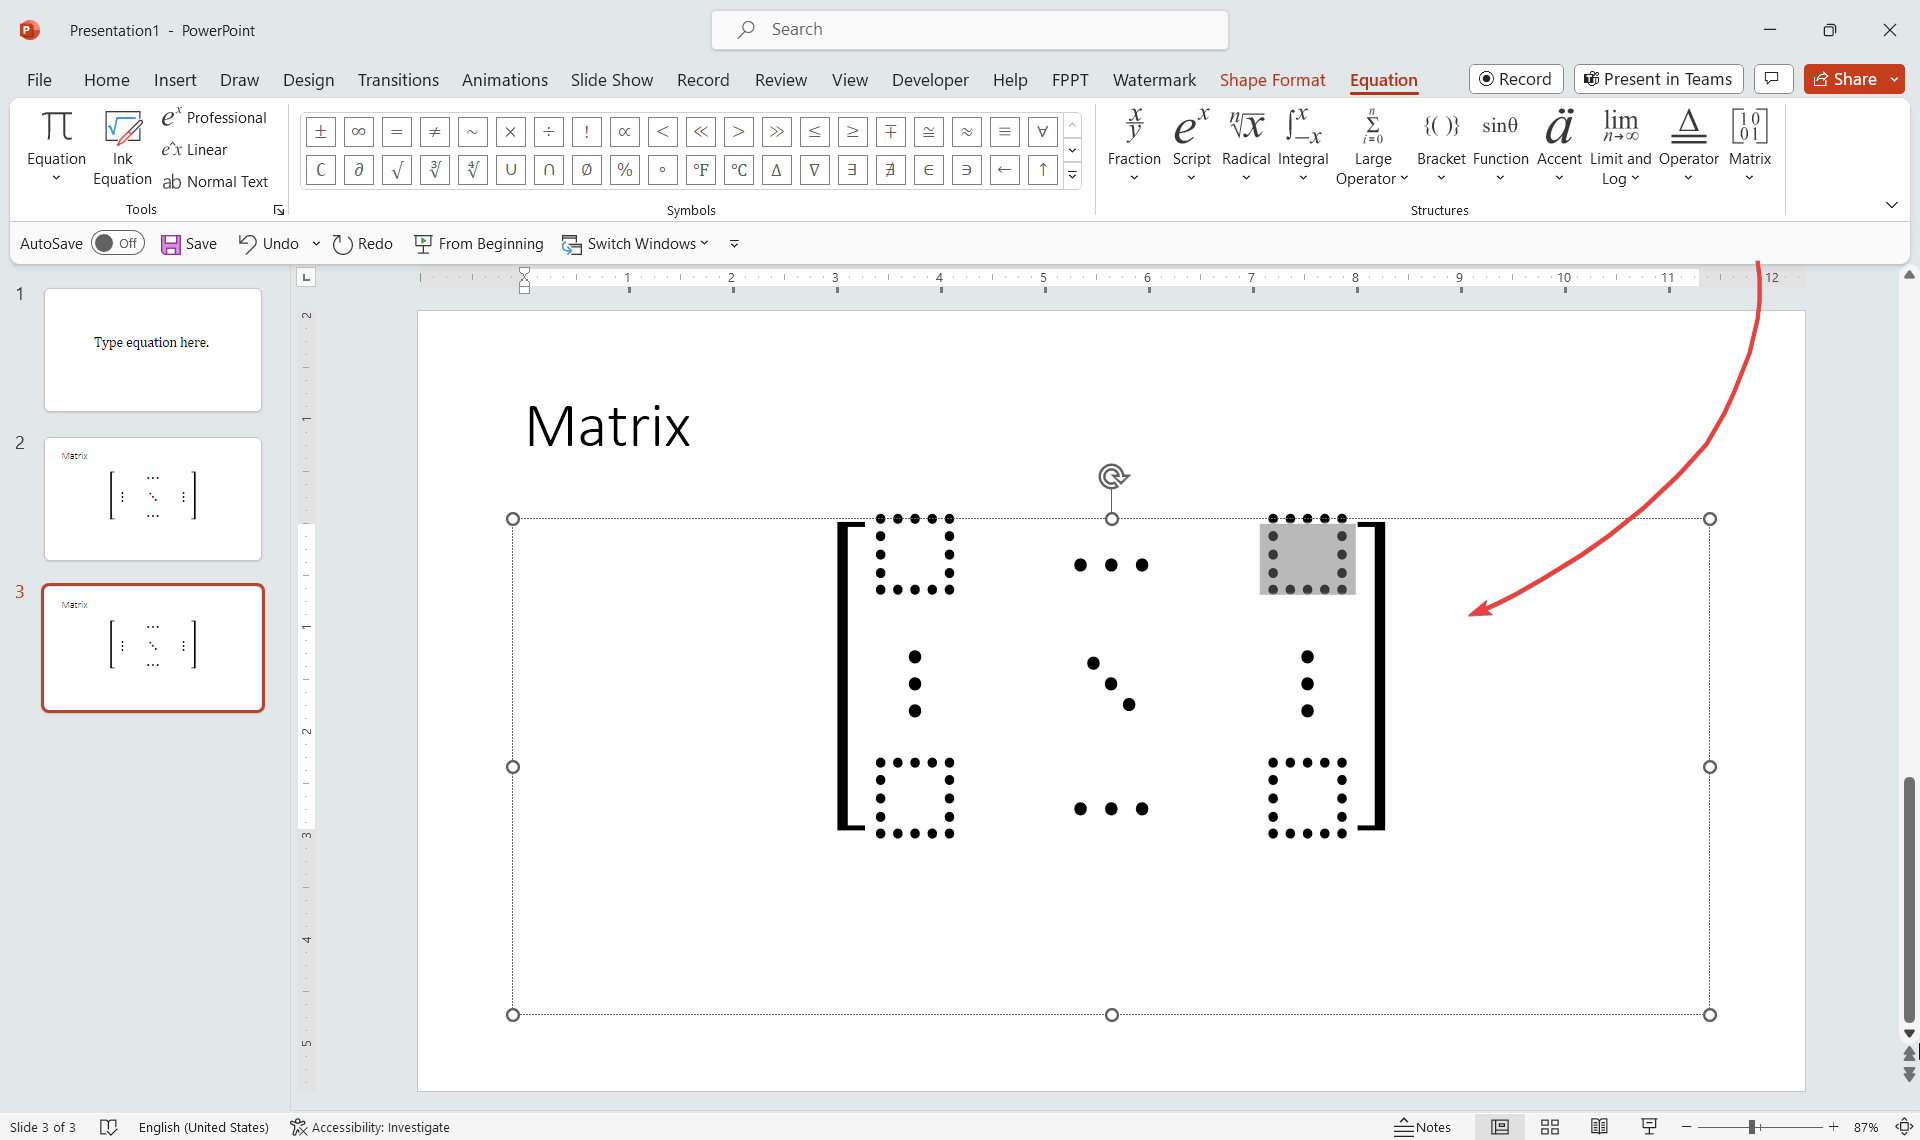 Example of Matrix inserted in a PowerPoint slide using PowerPoint Equations Editor